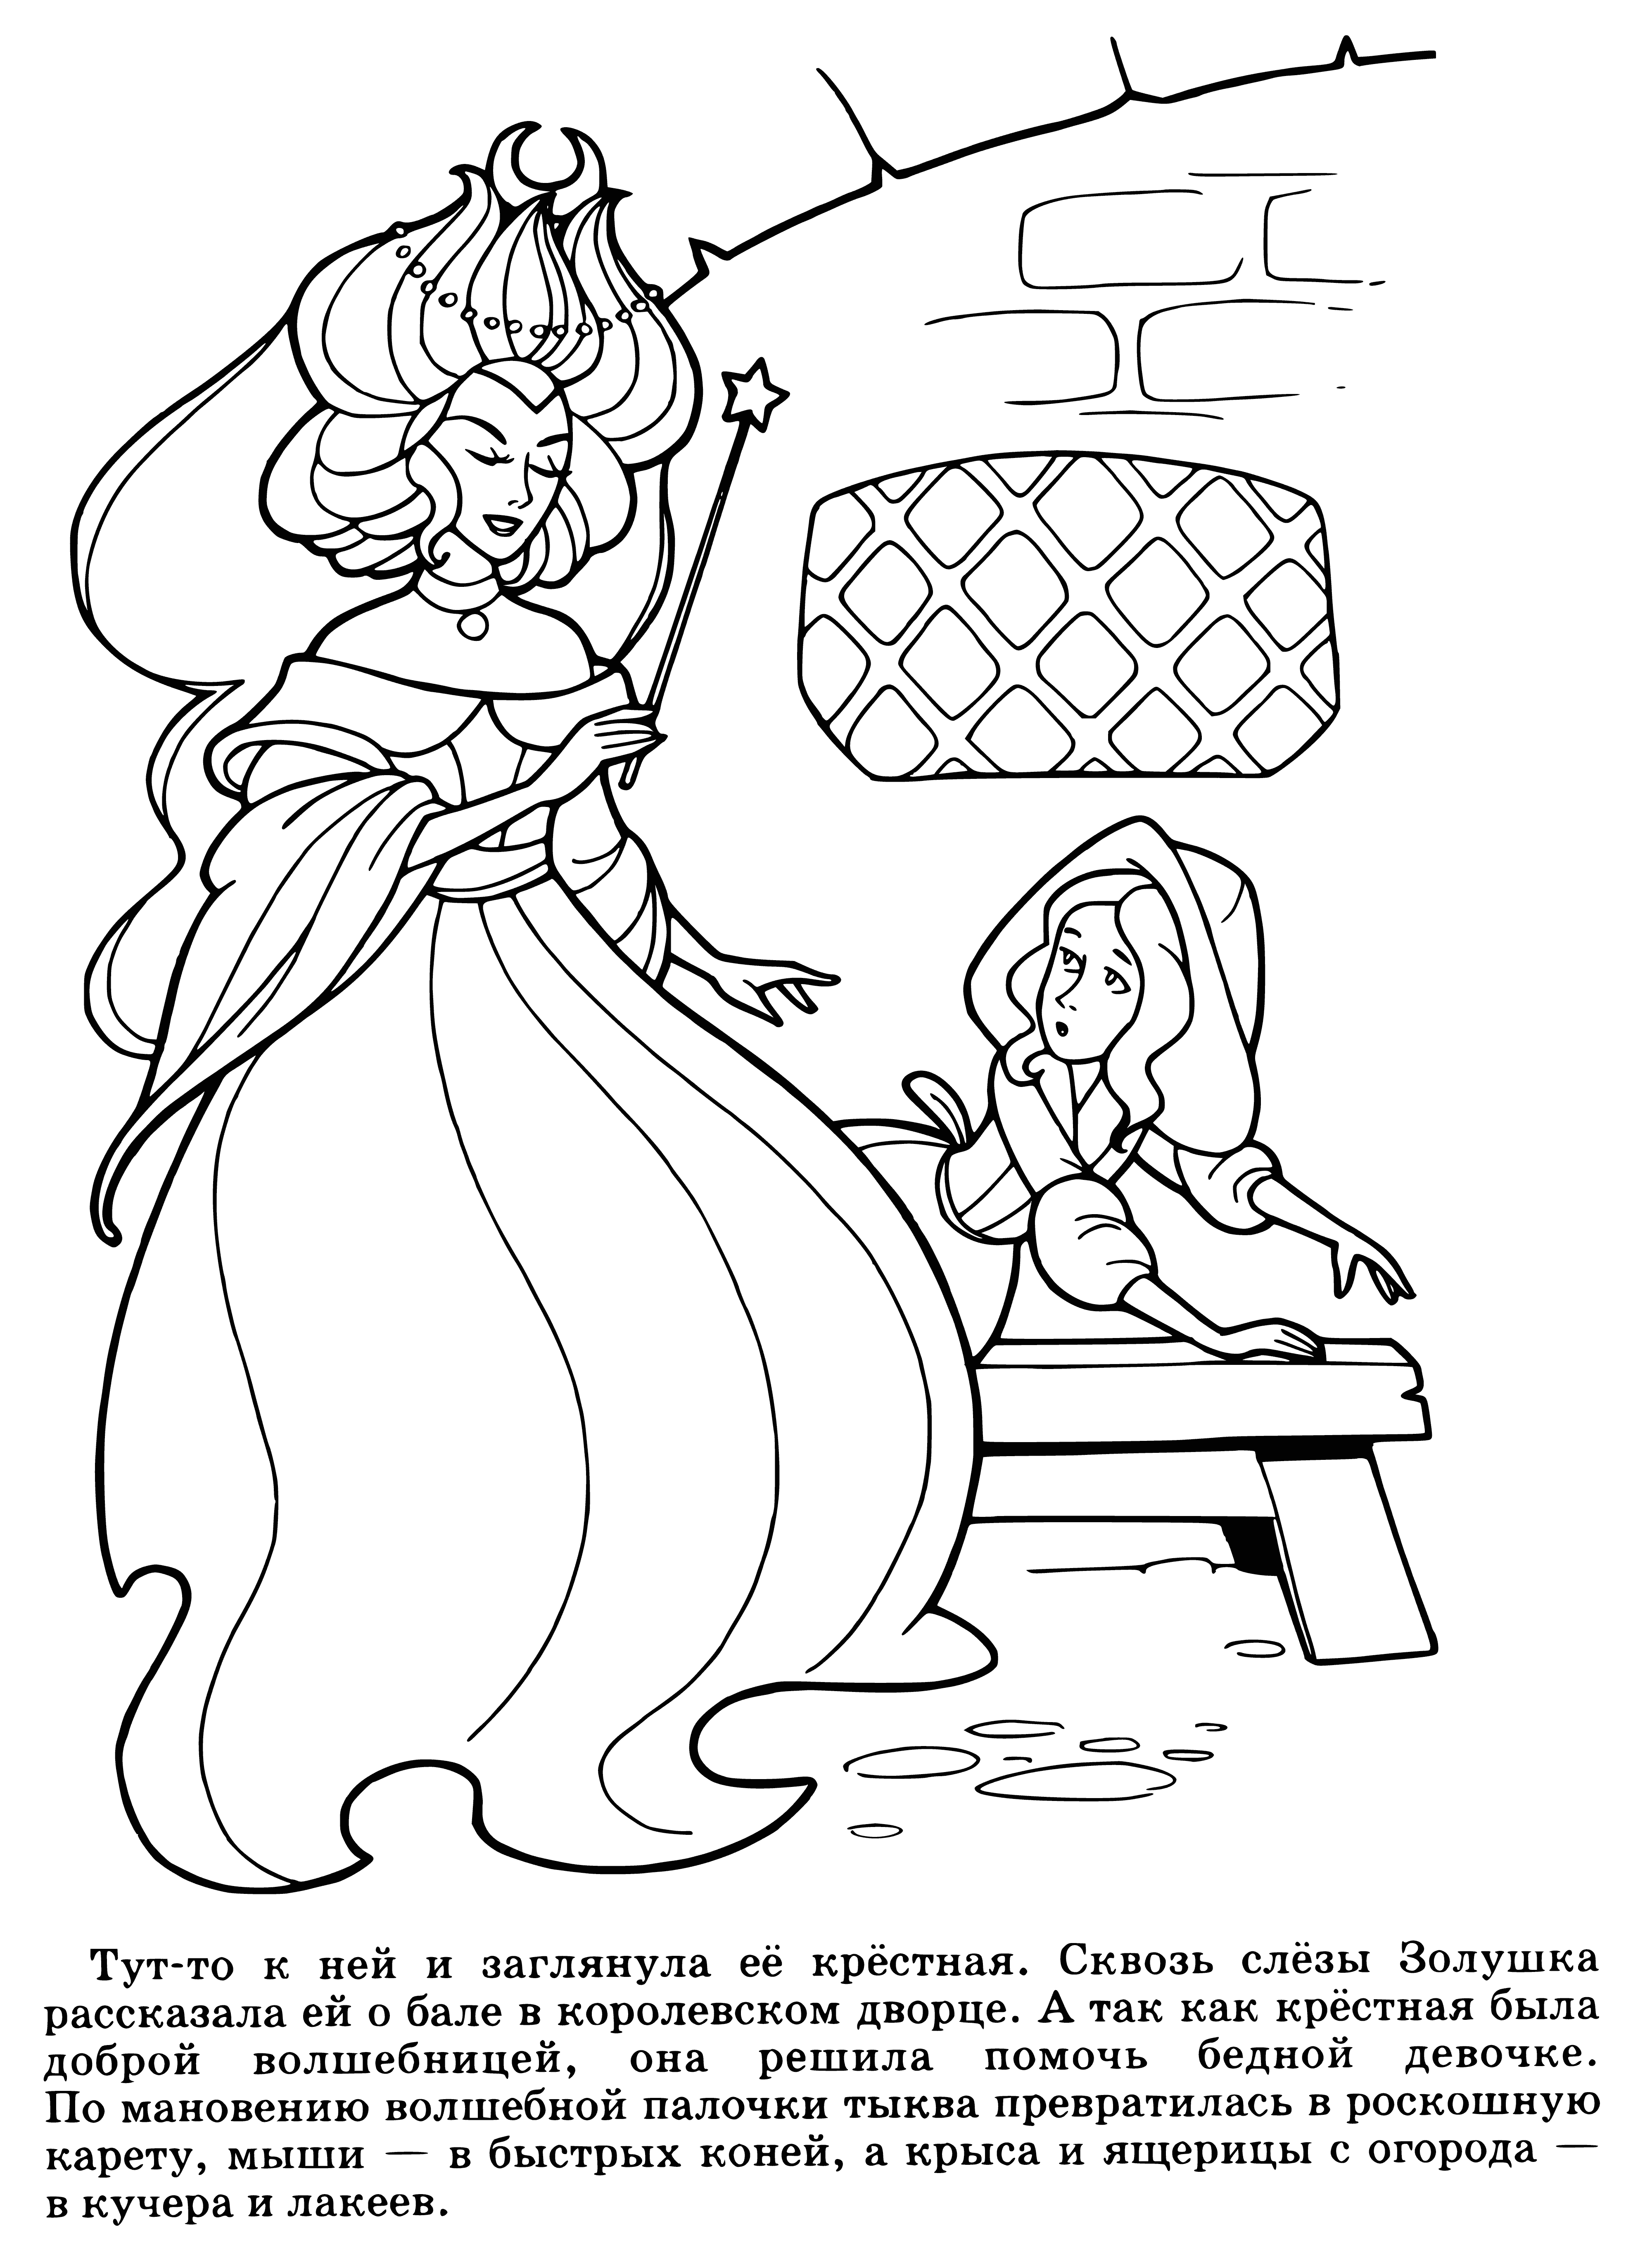 Fairy godmother coloring page